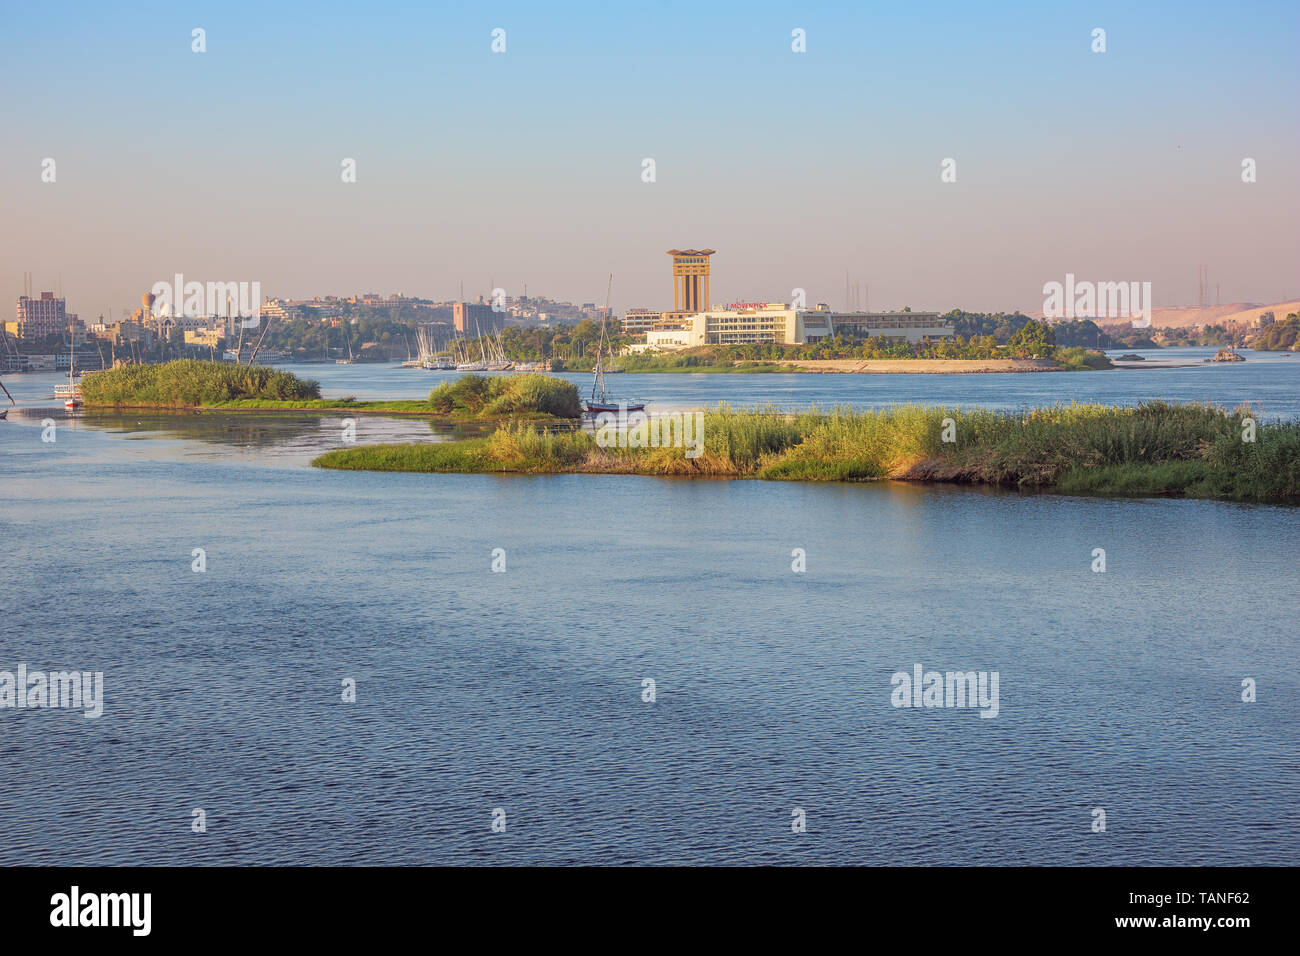 Editorial: ASWAN, EGYPT, October 14, 2018 - The Nile with Aswan in a distance and some islands Stock Photo